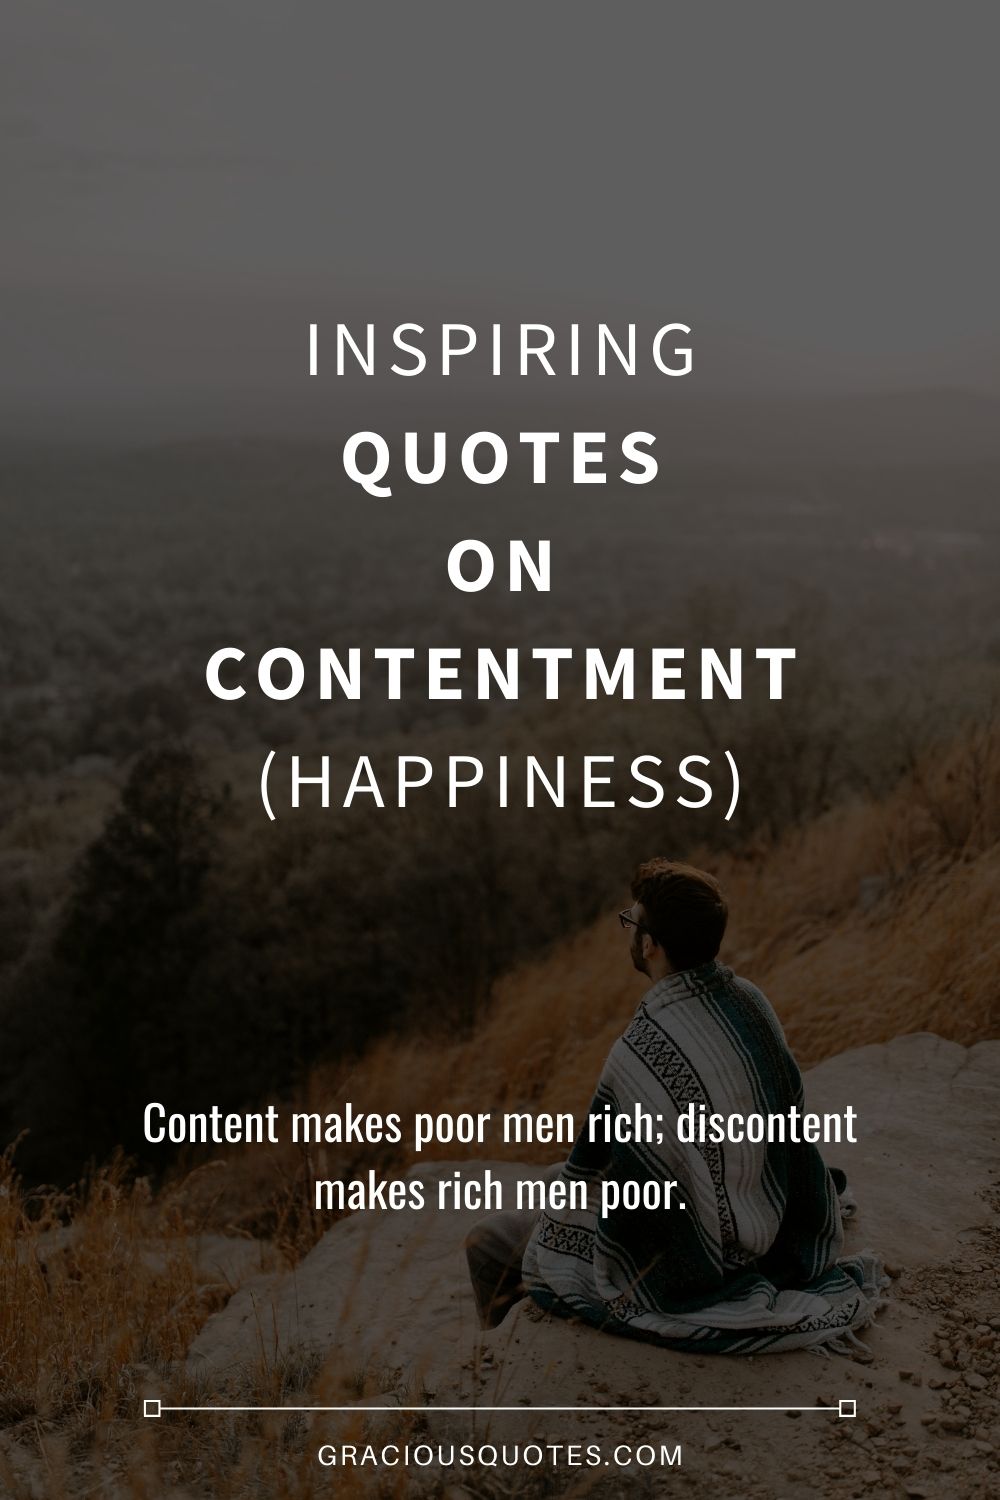 Inspiring Quotes on Contentment (HAPPINESS) - Gracious Quotes